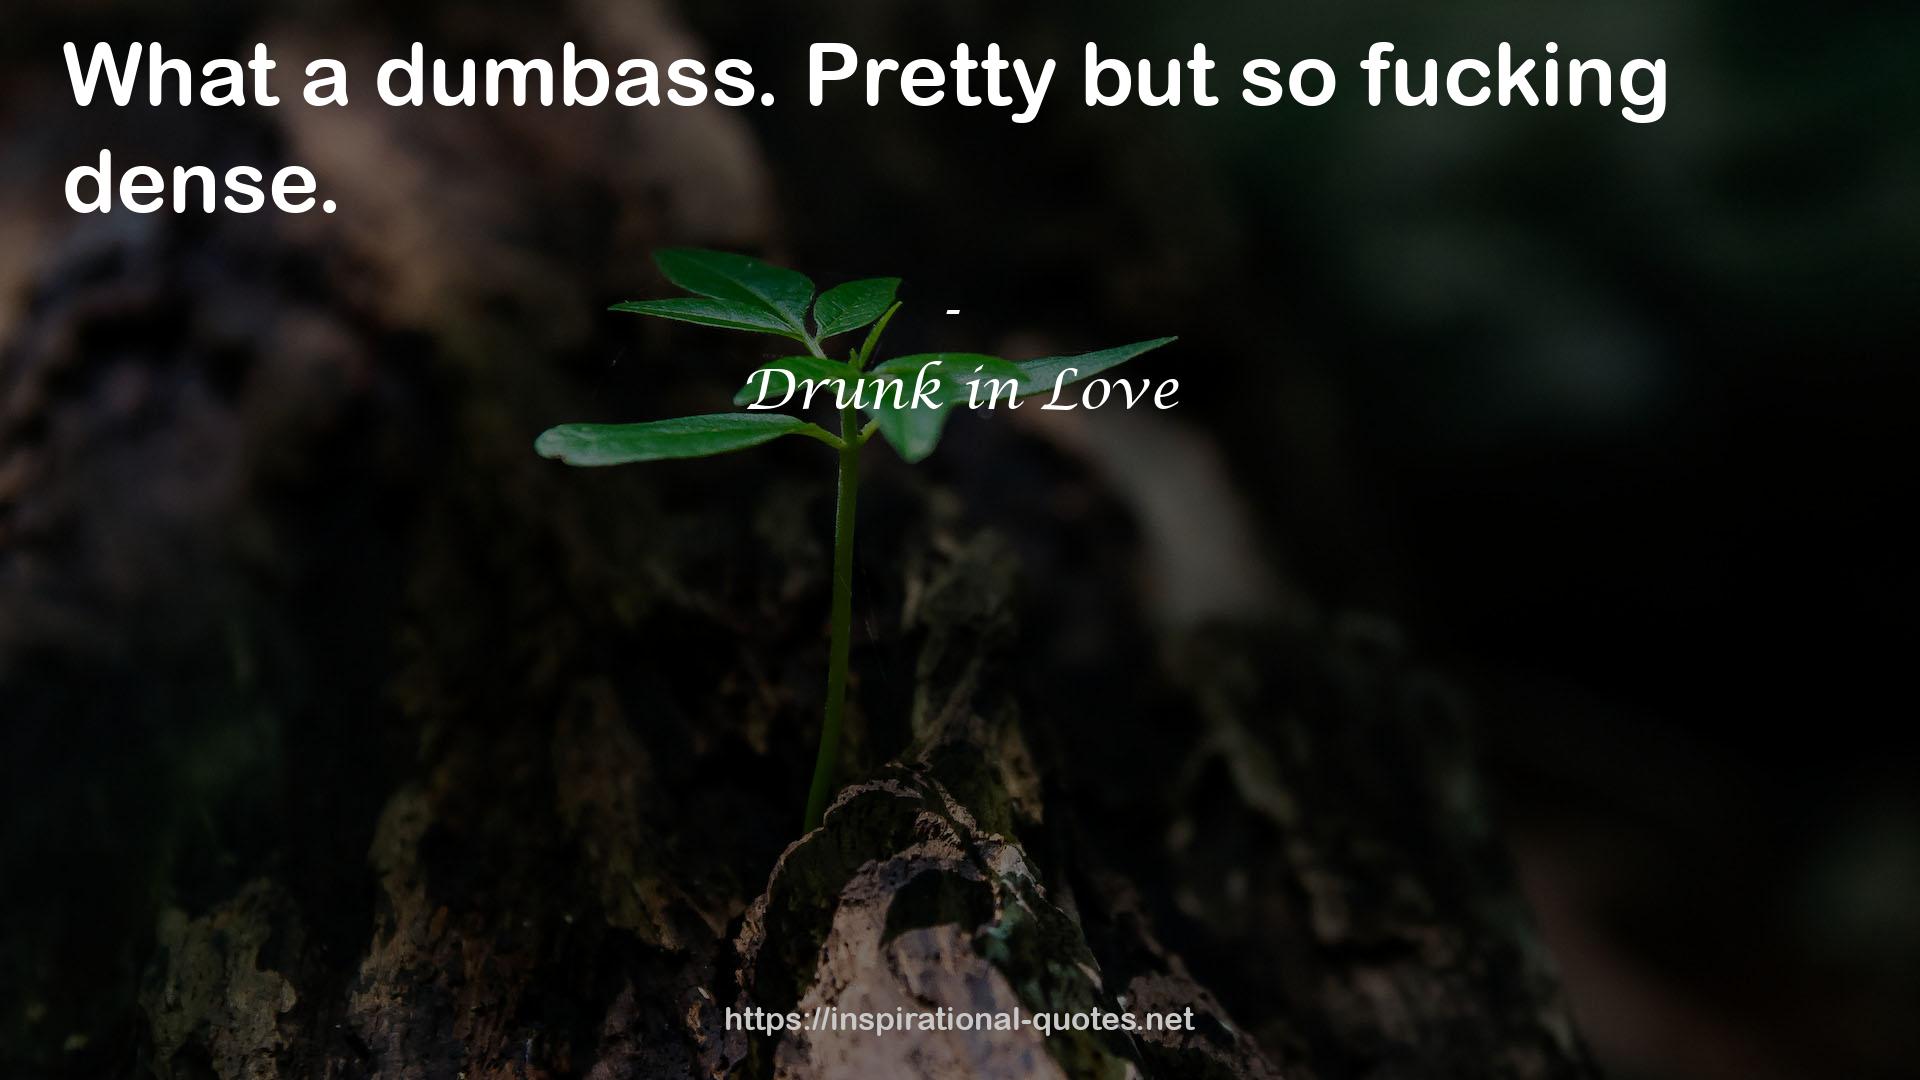 Drunk in Love QUOTES